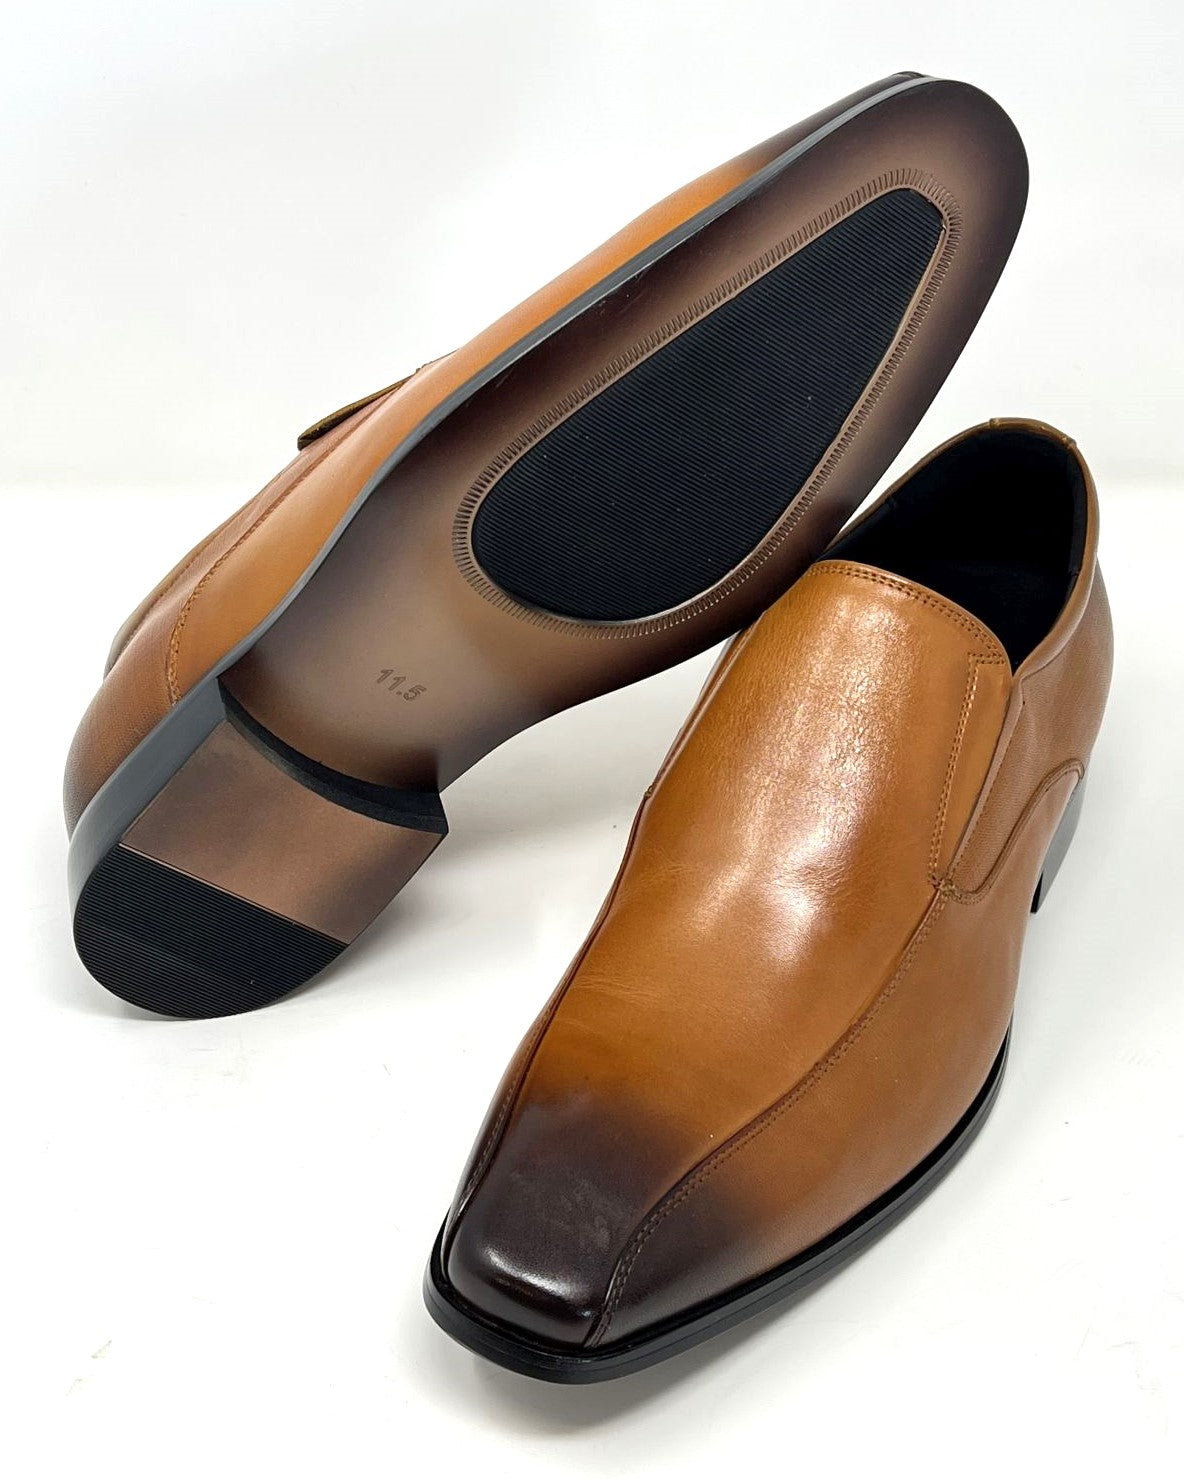 FSP0121 - 2.2 Inches Taller (Brown) - Size 11.5 Only